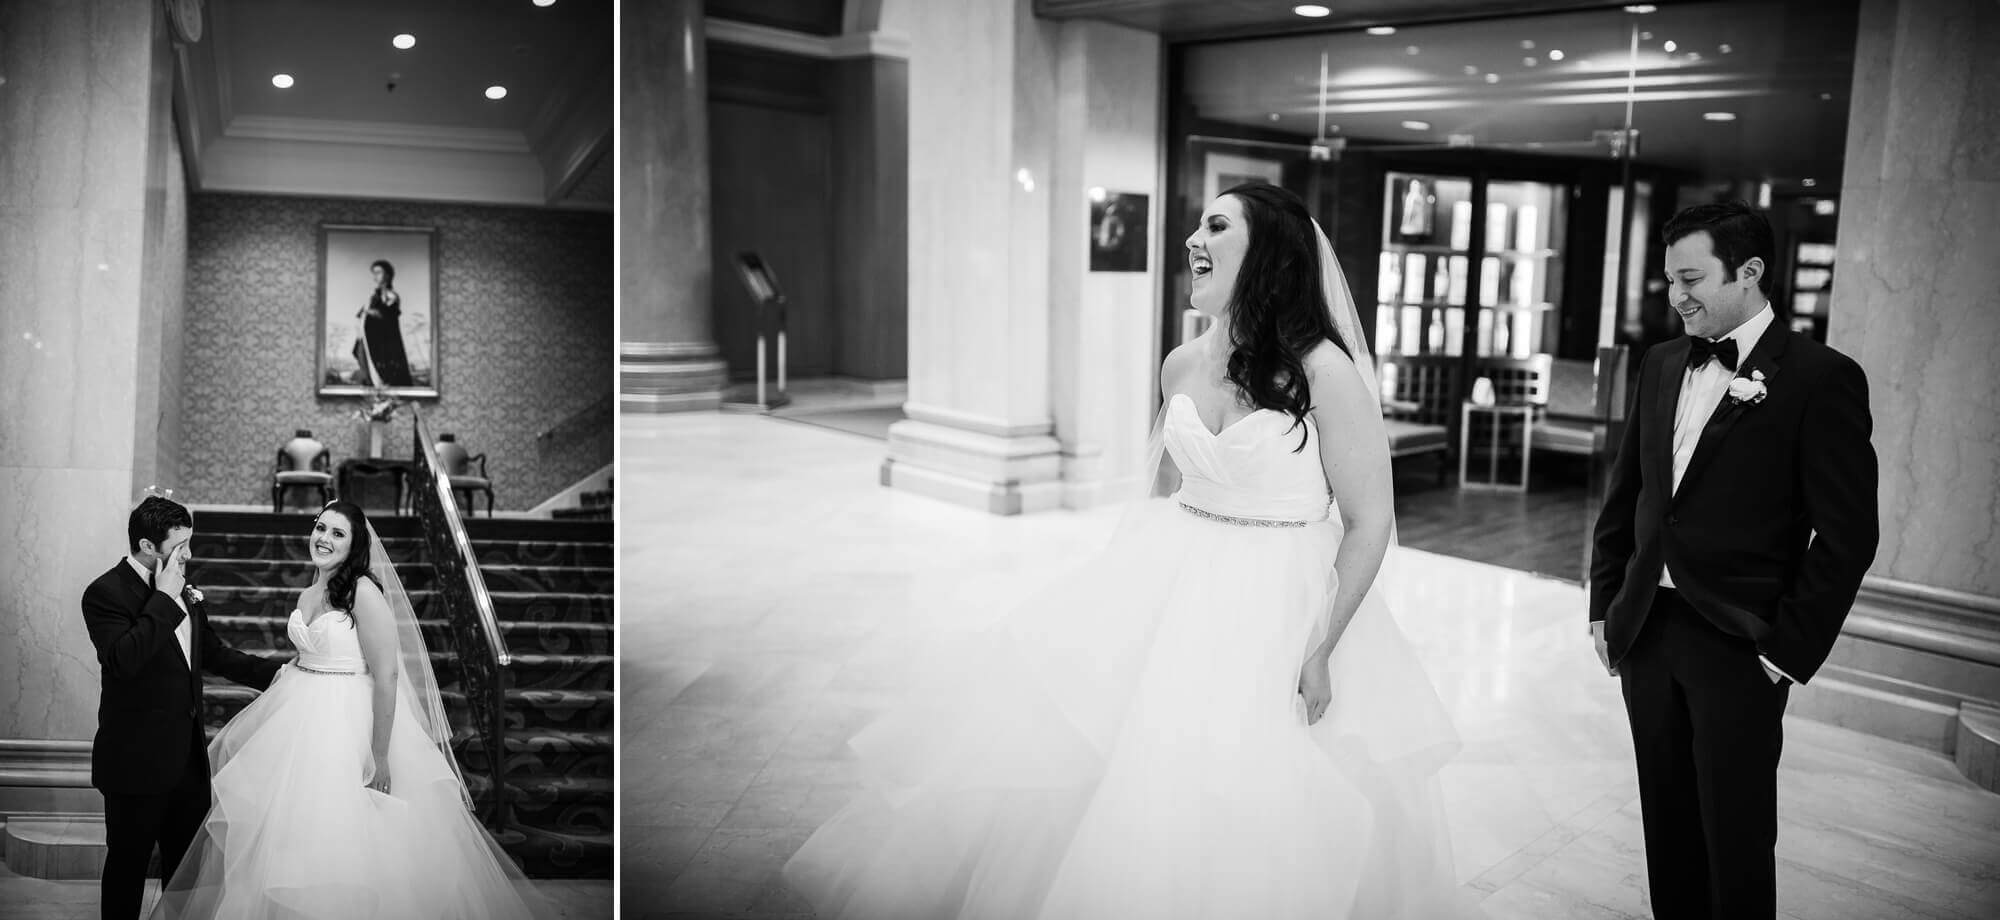 Black and white portraits of the bride doing a spin for her groom when he sees her for the first time at the Omni King Edward Hotel in Toronto